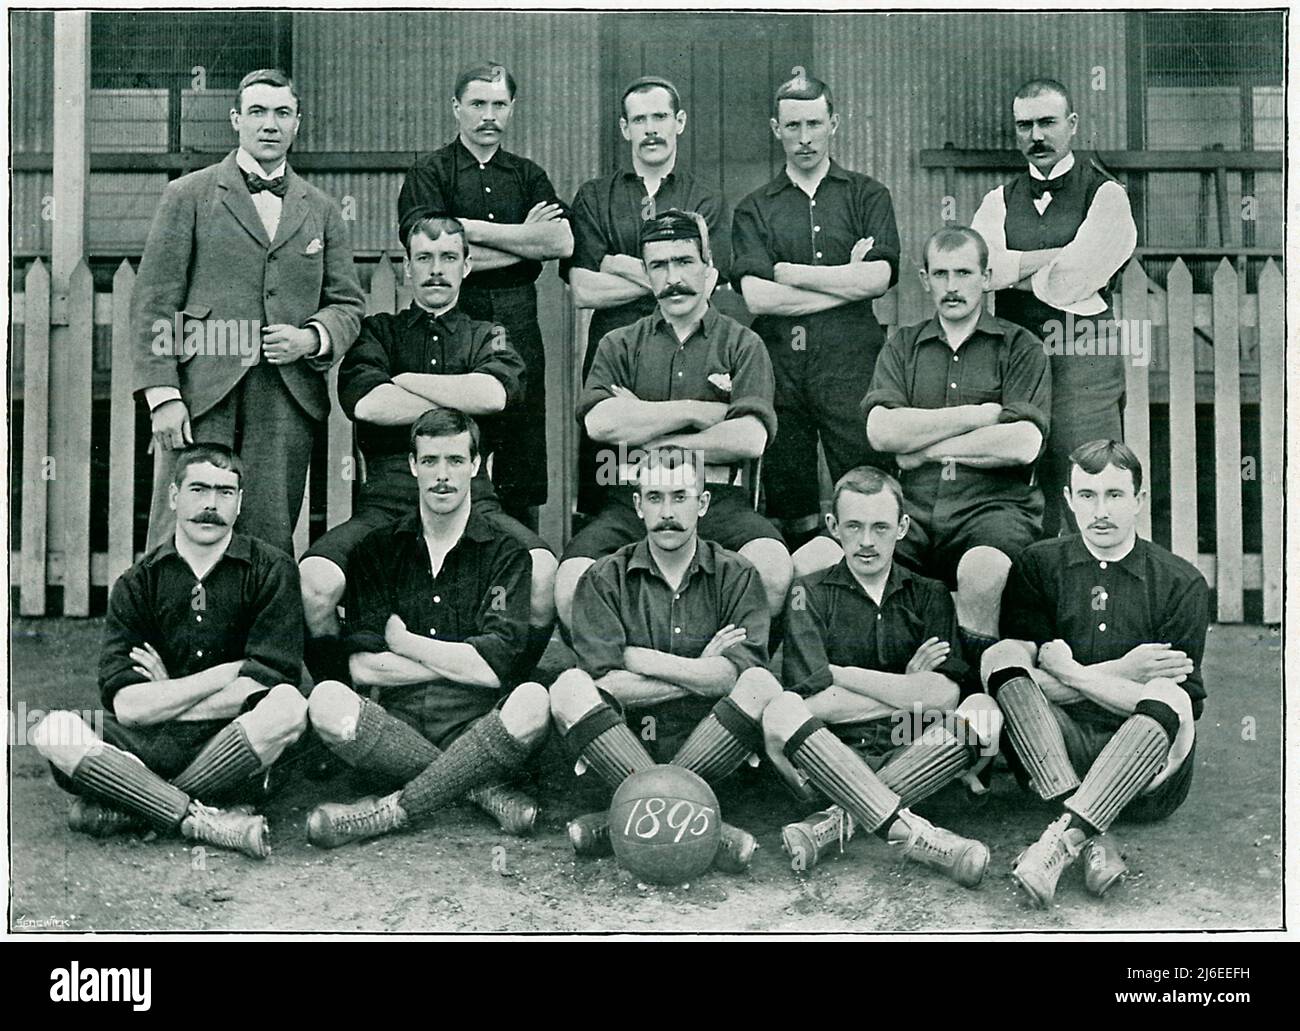 Woolwich Arsenal, 1895 team photograph of the football club founded in 1885 then playing in the 2nd Division of the Football League, later becoming Arsenal FC Stock Photo